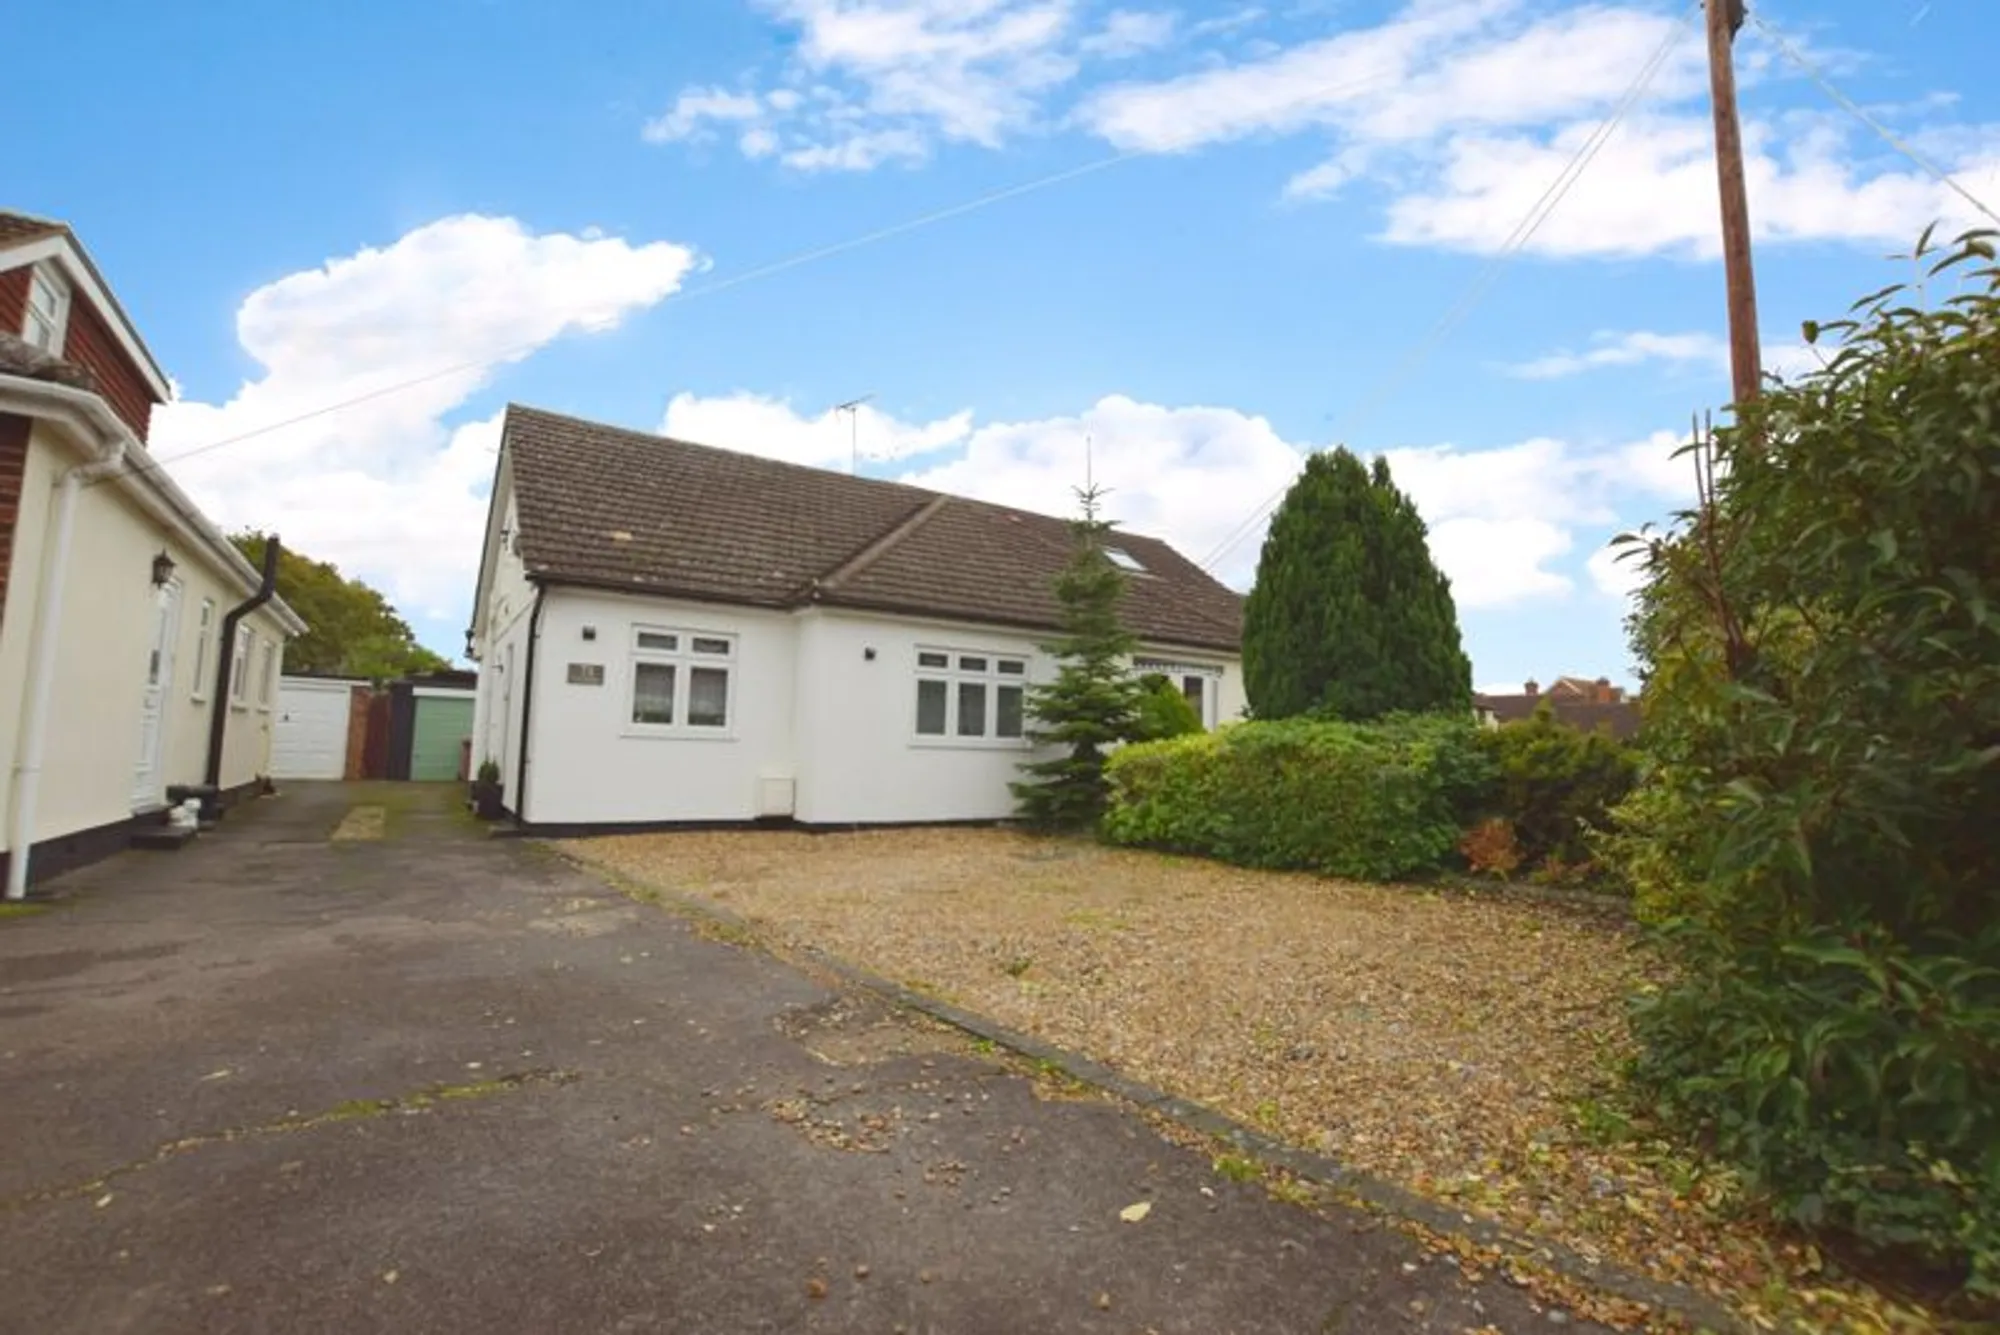 3 bed semi-detached house for sale in Church Lane, Upminster - Property Image 1